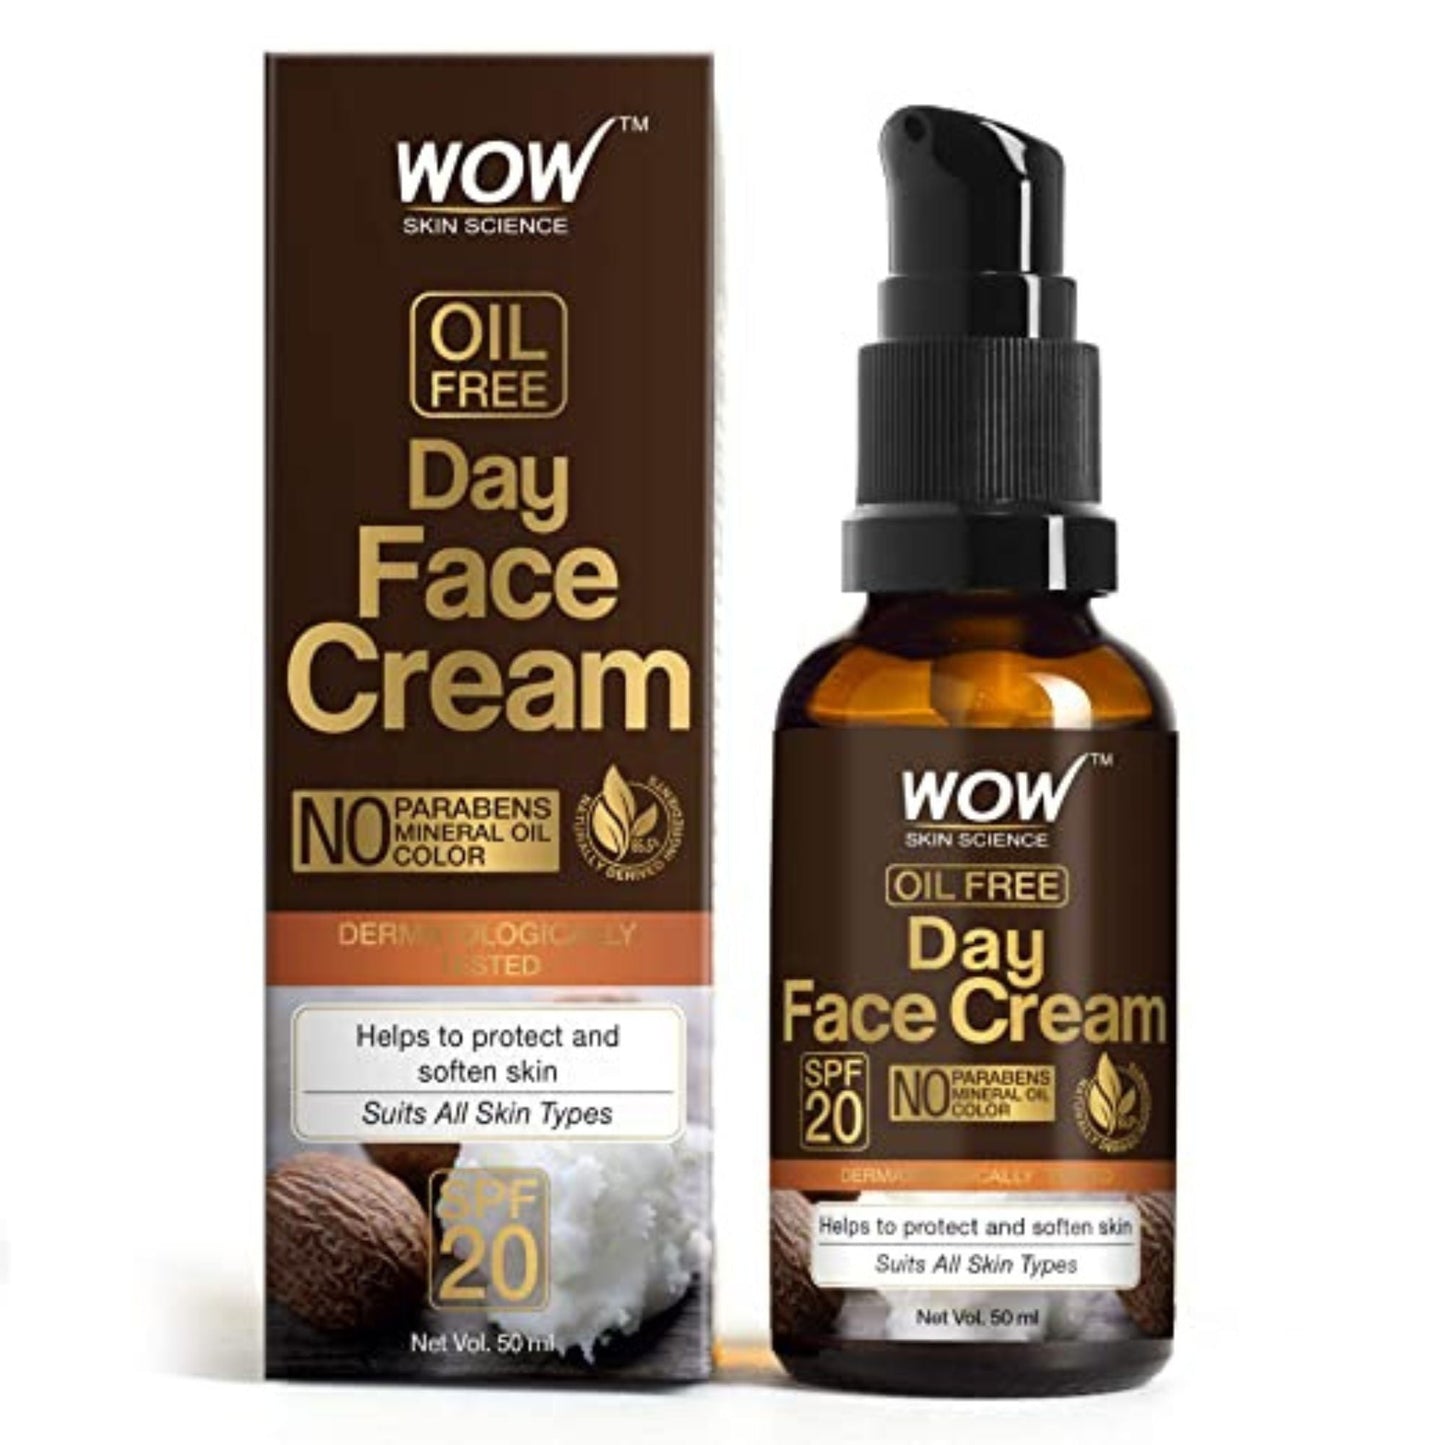 WOW Skin Science Day Face Cream - SPF 20 - with Rosehip Oil & Shea Butter - OIL FREE - Quick Absorbing - Protect & Soften Skin - No Parabens, Mineral Oil & Color - 50mL